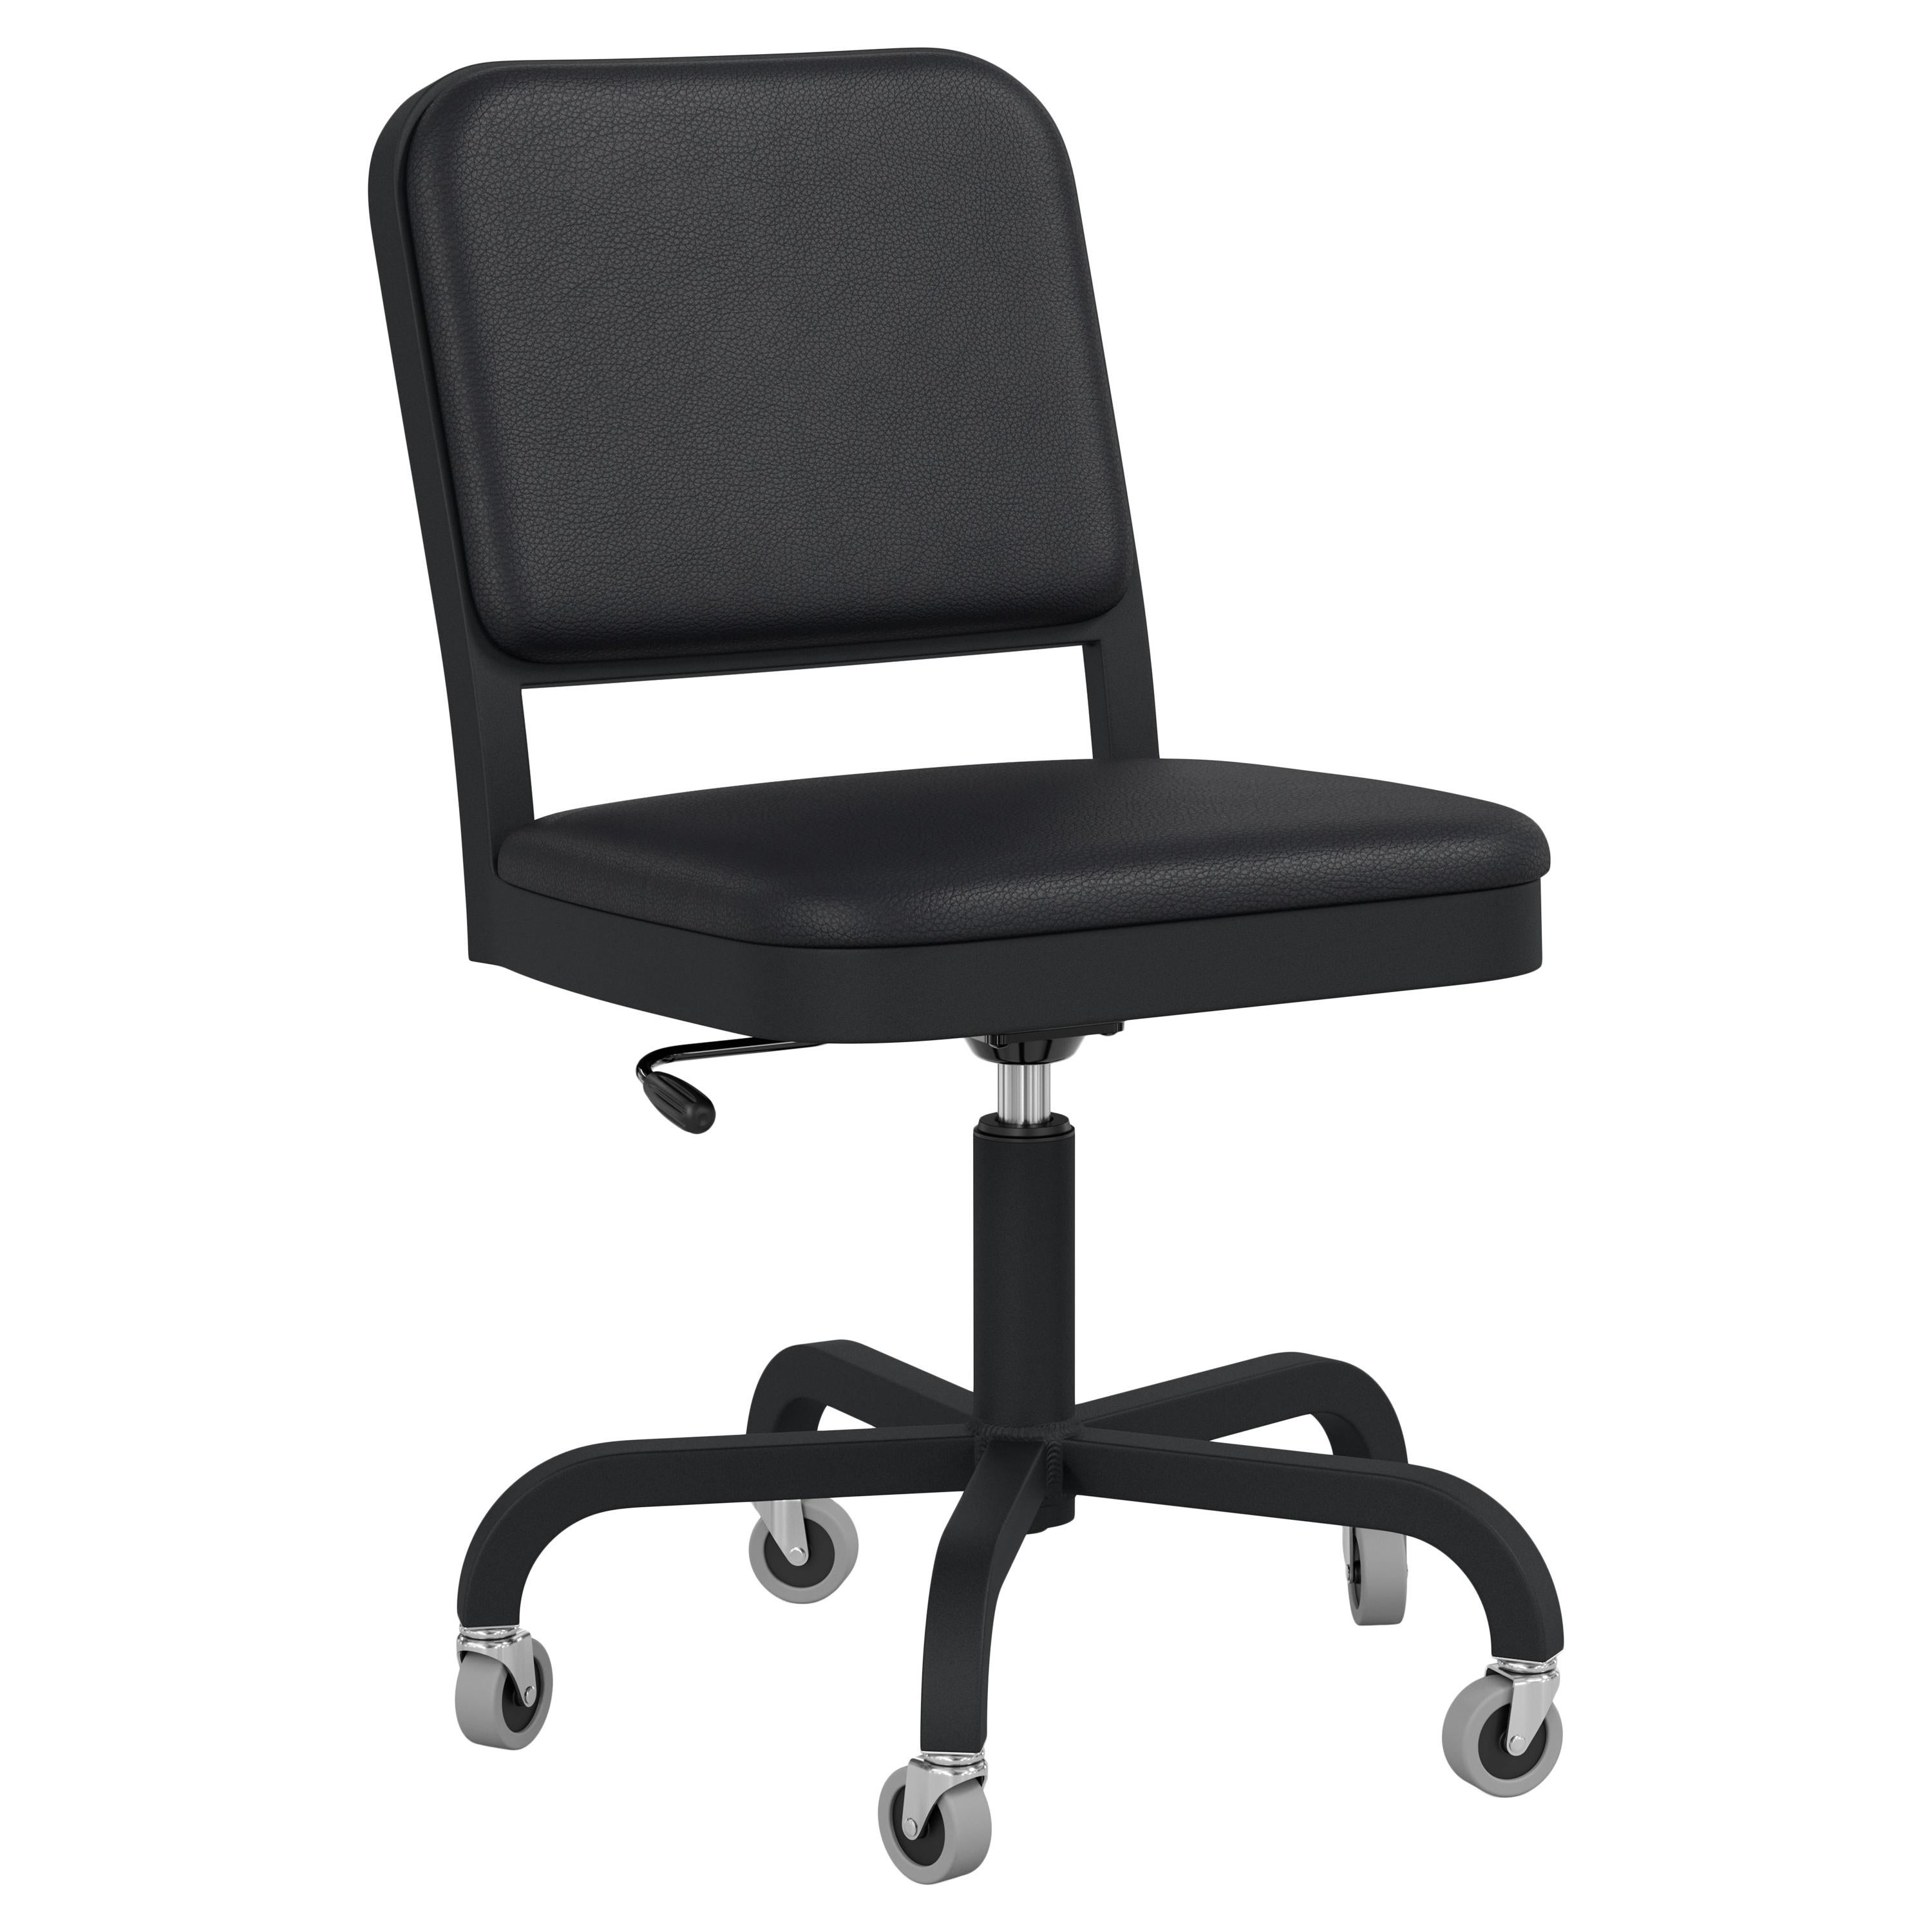 Emeco Navy Officer Swivel Chair in Black Leather and Black Aluminum Frame